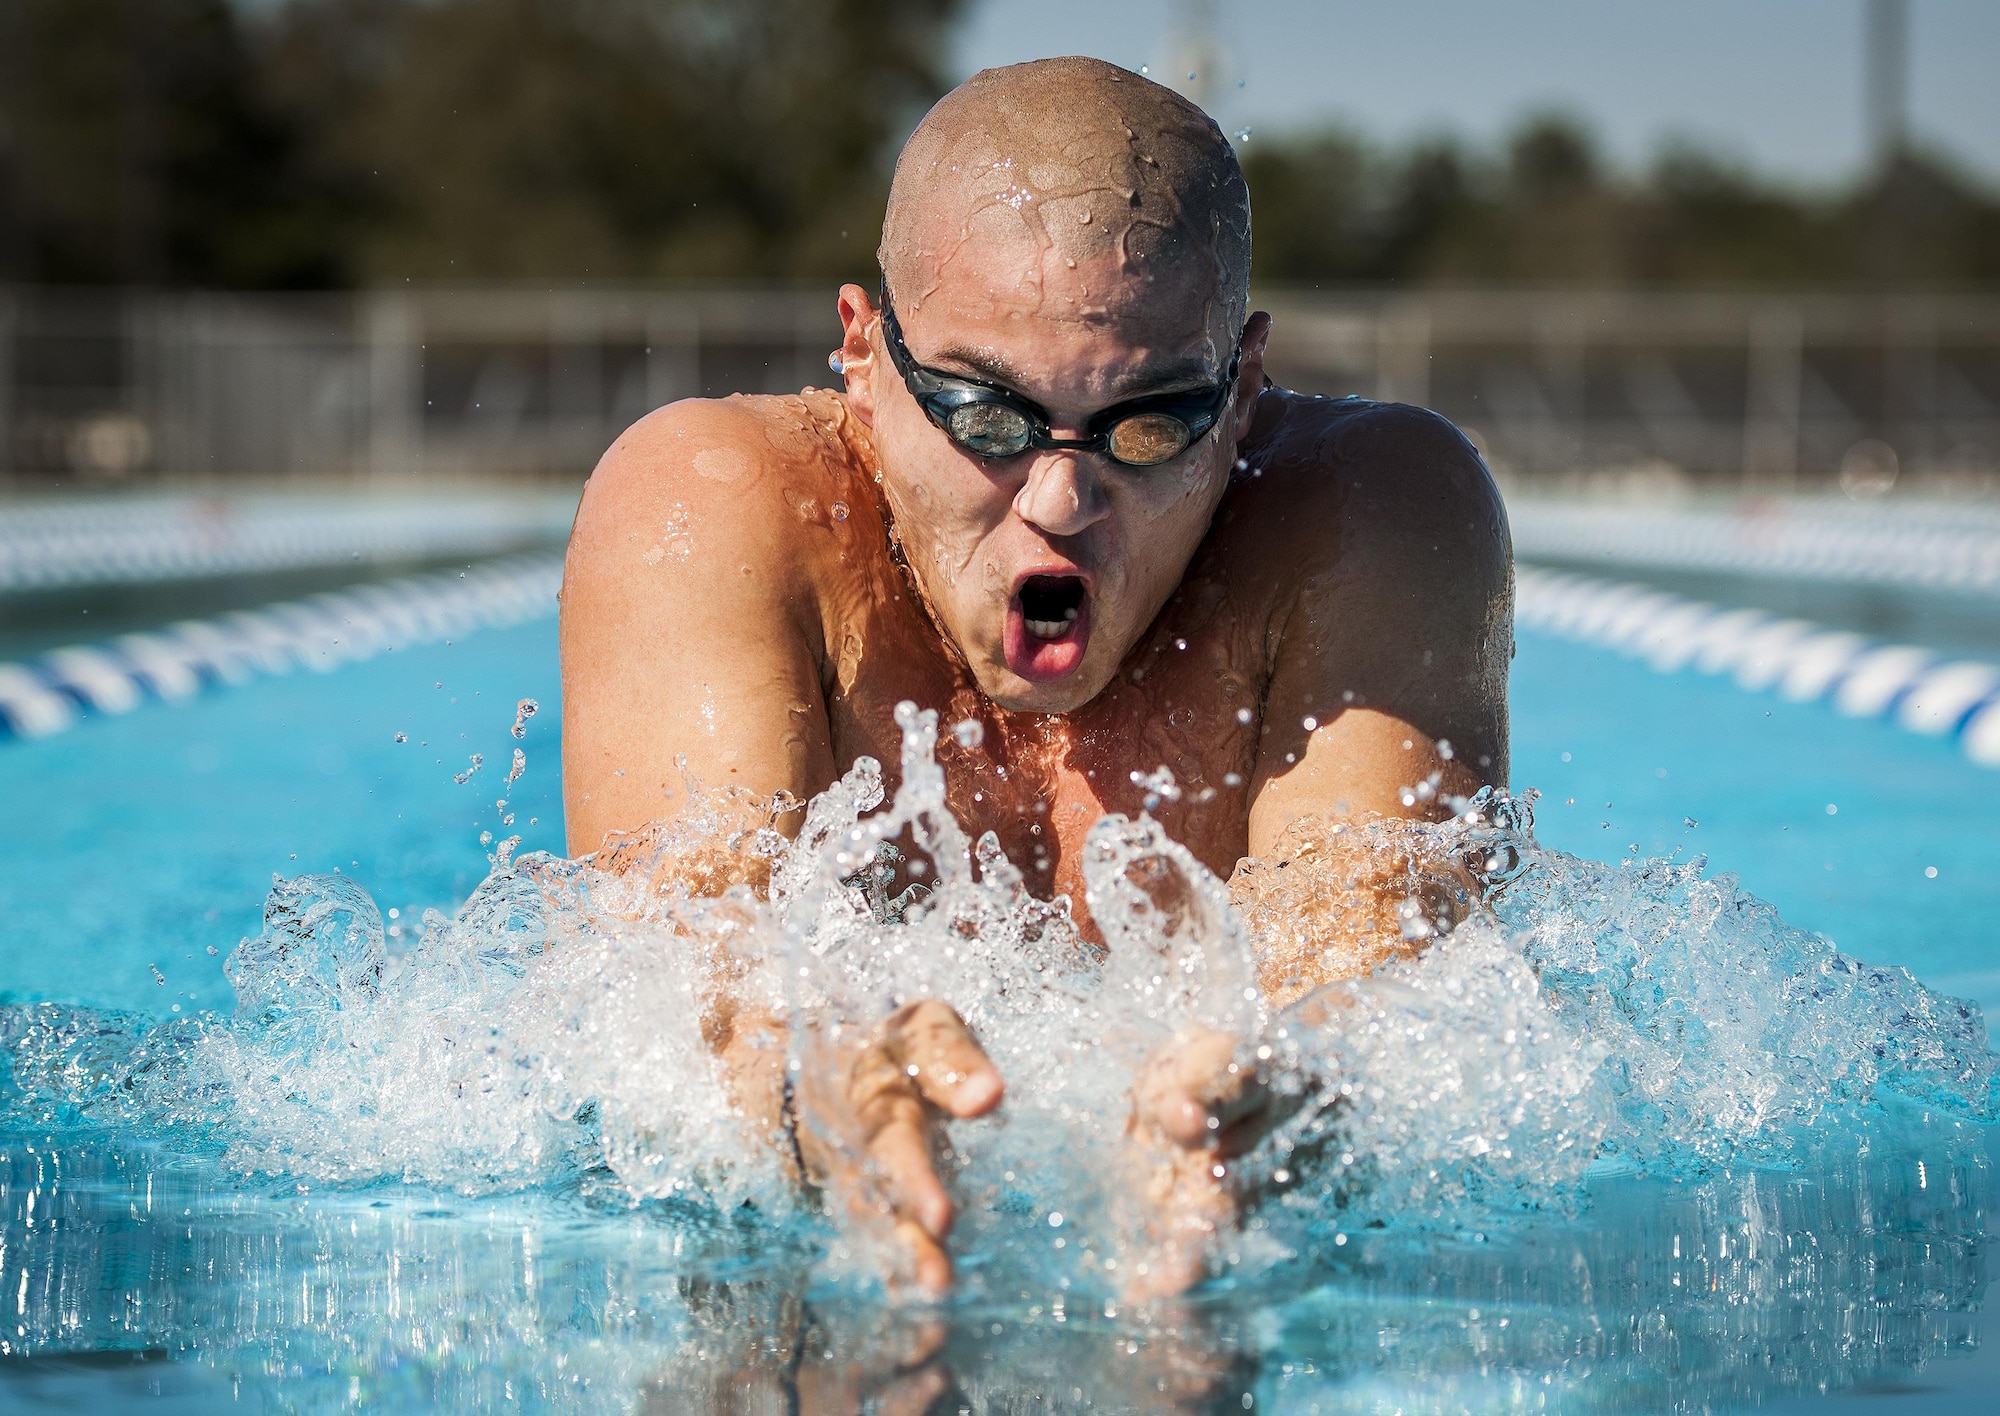 Senior Airman Francisco Perez Castillo, of the 96th Maintenance Group, comes up for air while swimming the breaststroke March 22, 2016, at Eglin Air Force Base, Fla. The 26-year-old Airman was recently inducted into the Pontifical Catholic University of Puerto Rico’s sports hall of fame. (U.S. Air Force photo/Samuel King Jr.)